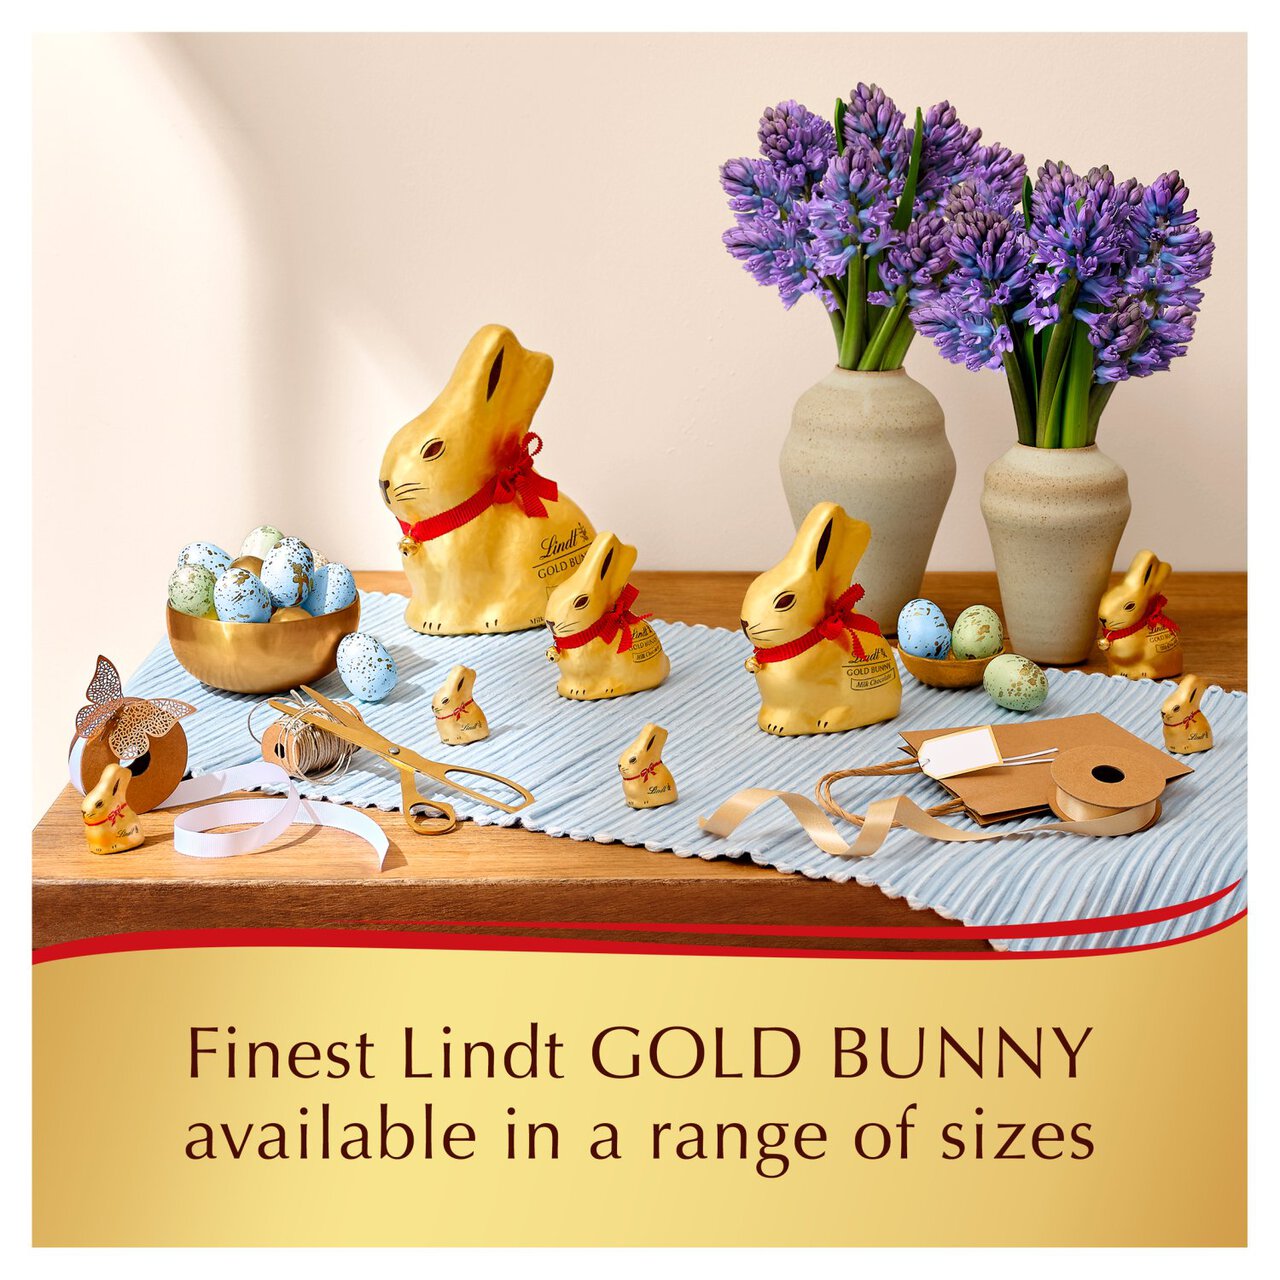 Lindt Easter Gold Bunny Milk Chocolate Family Hutch 130g